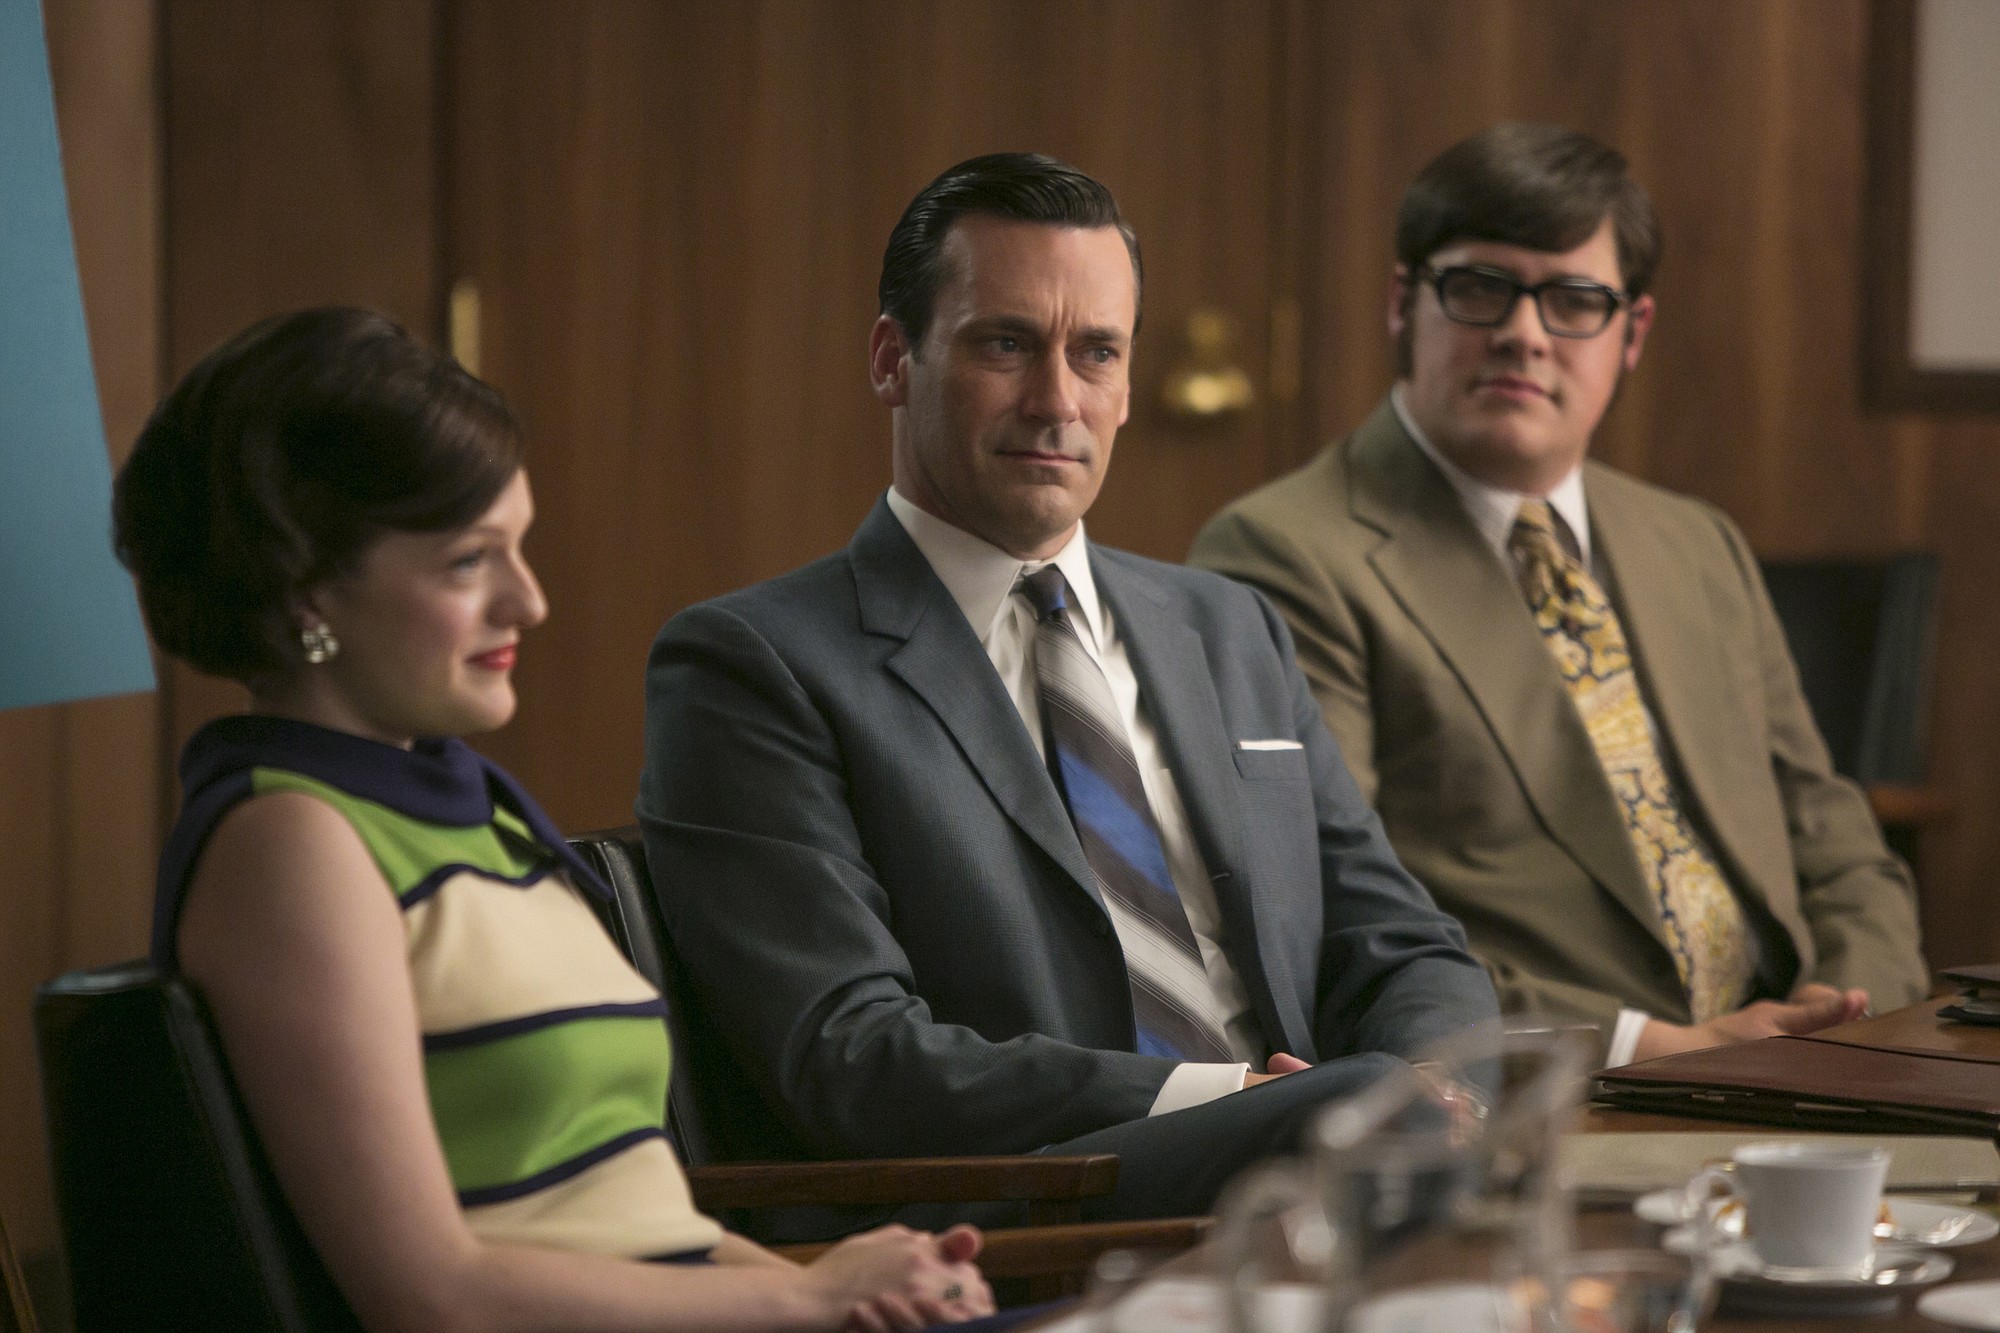 AMC
Elisabeth Moss, from left, Jon Hamm and Rich Sommer attend a meeting in &quot;Mad Men.&quot; The series finale is 10 p.m. May 17 on AMC.